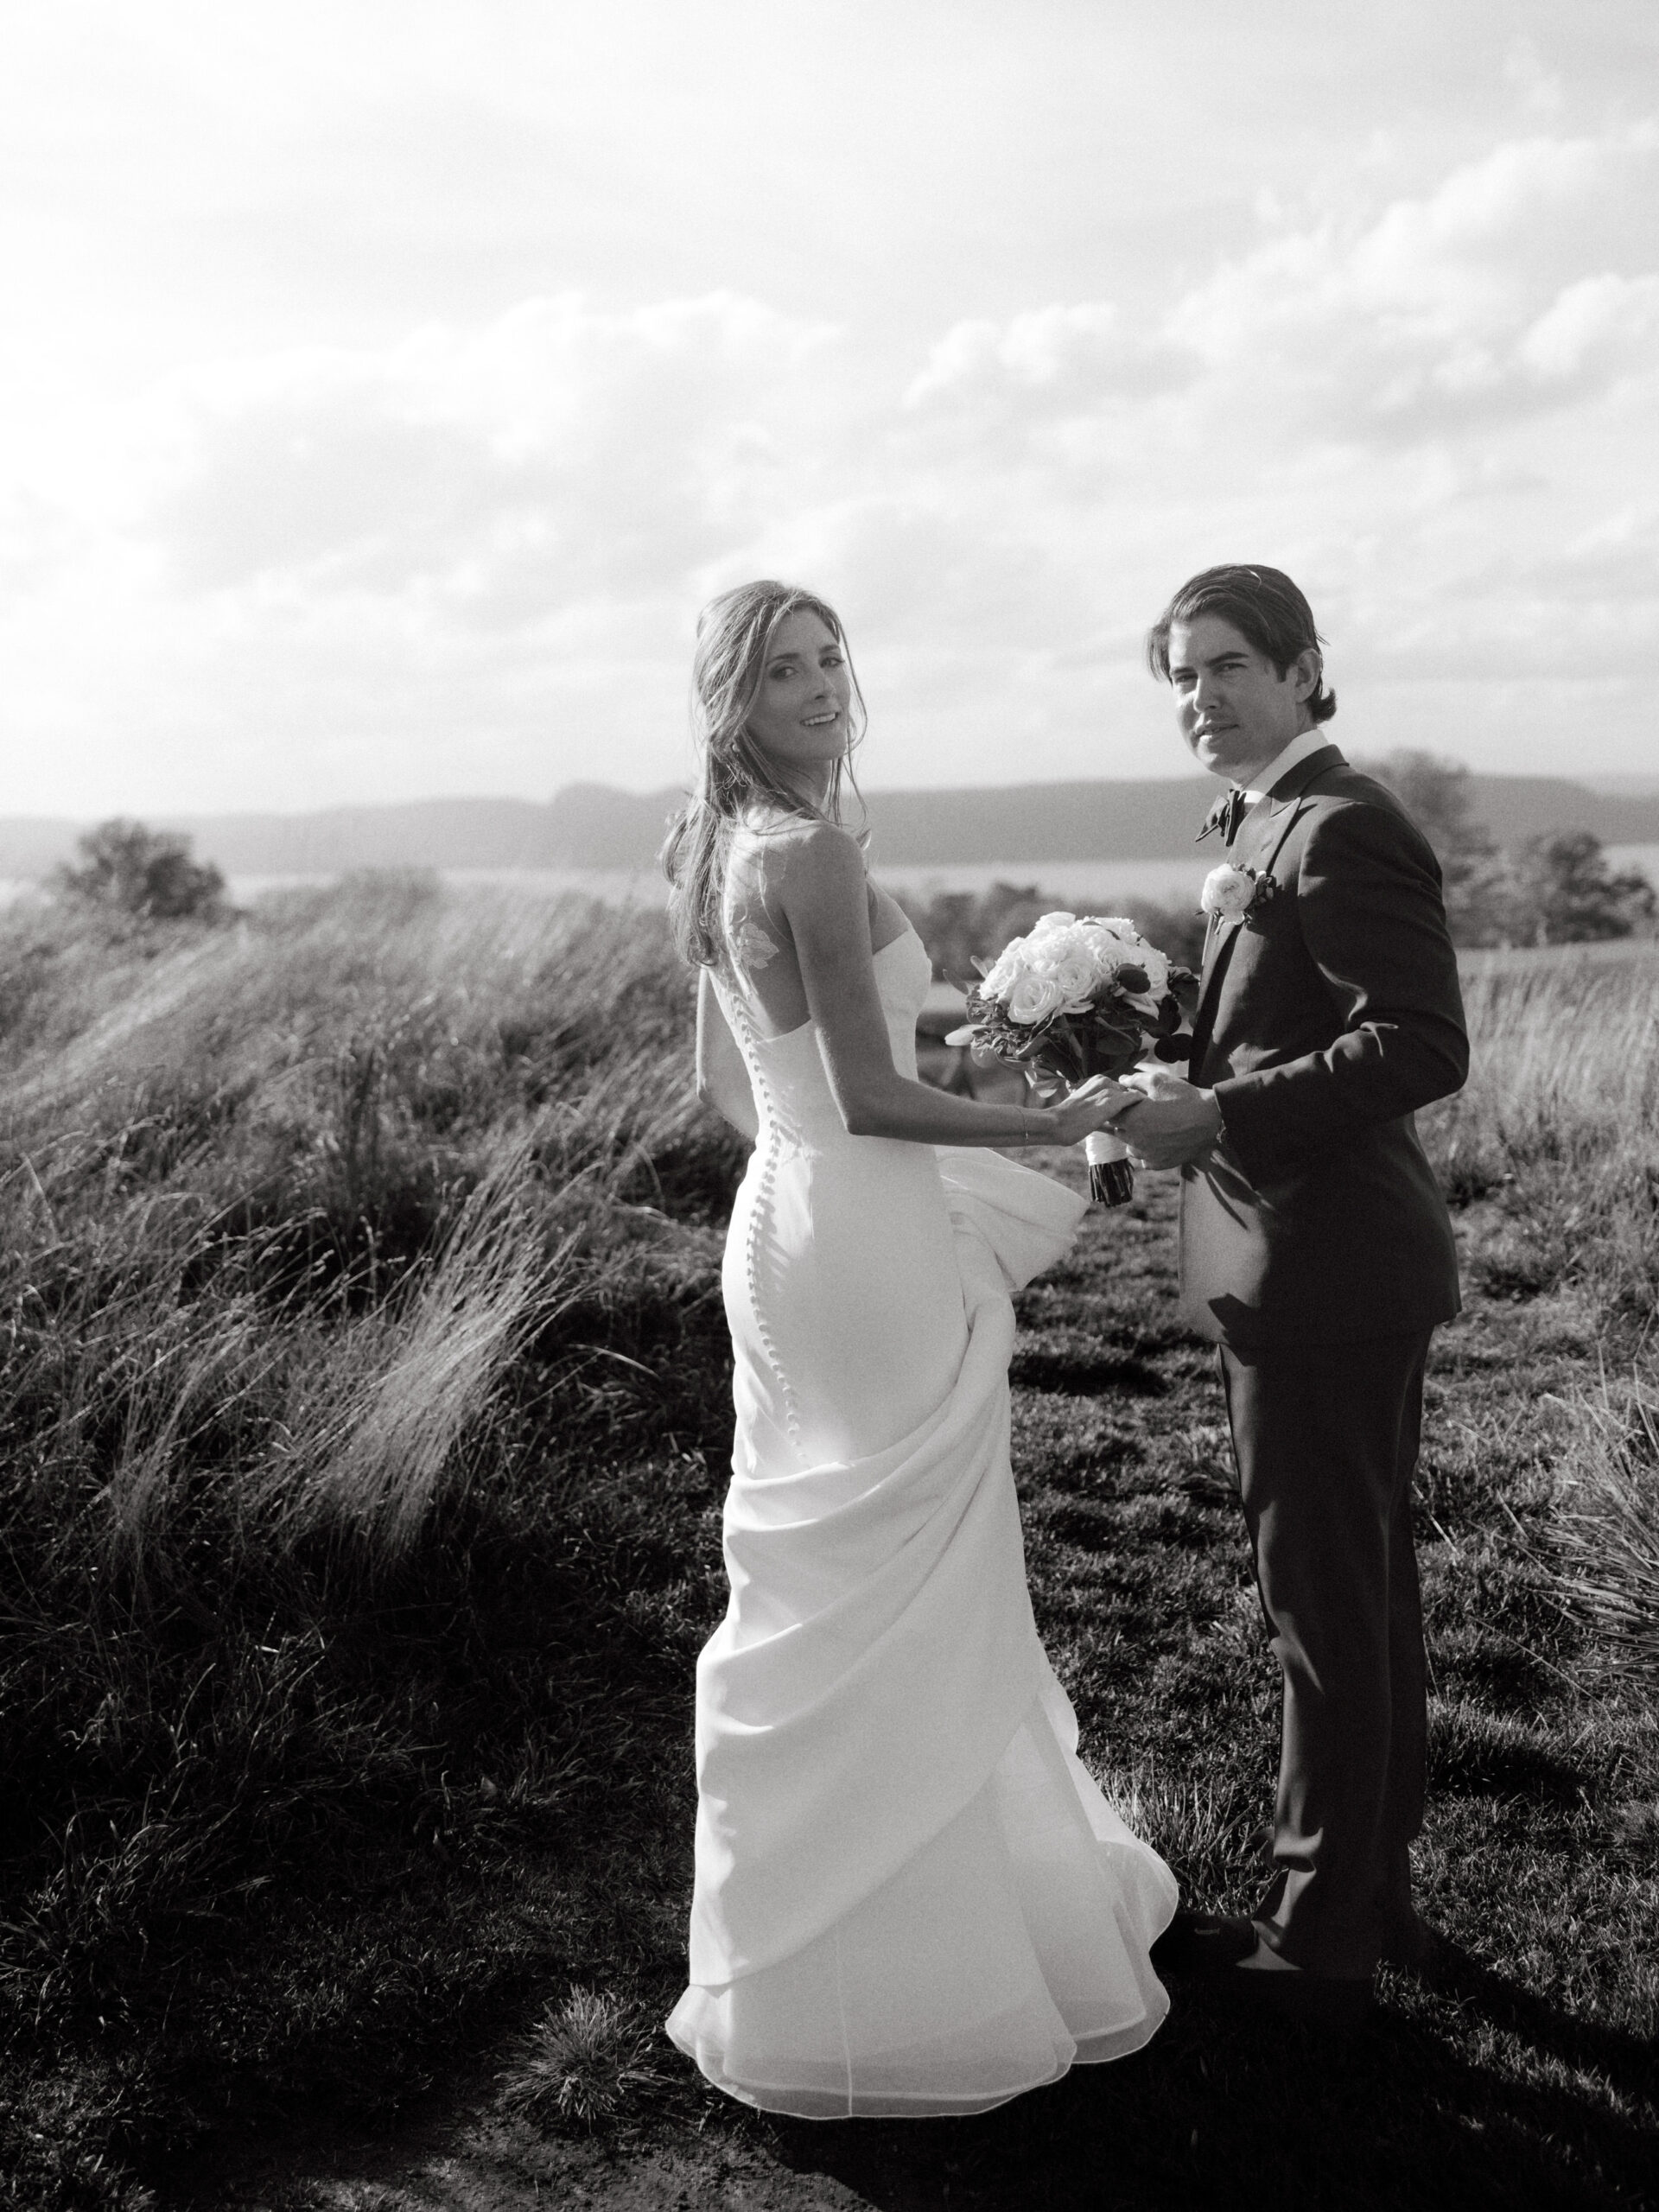 Black and white candid shot of the newlyweds. Outdoor wedding photography image by Jenny Fu Studio